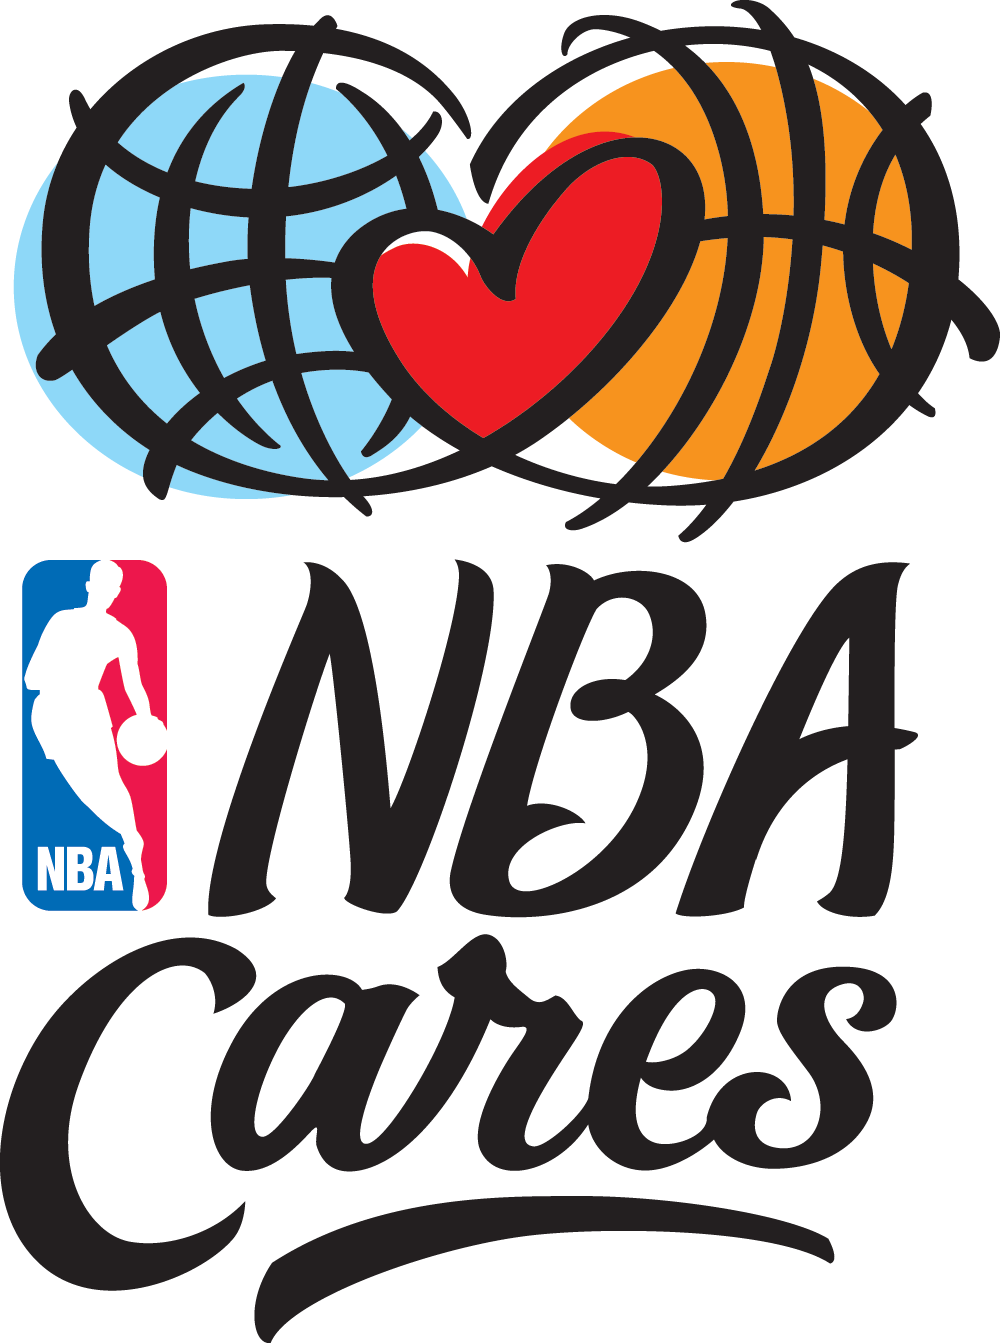 http://leobahenaproject.neocities.org/nba-cares.png